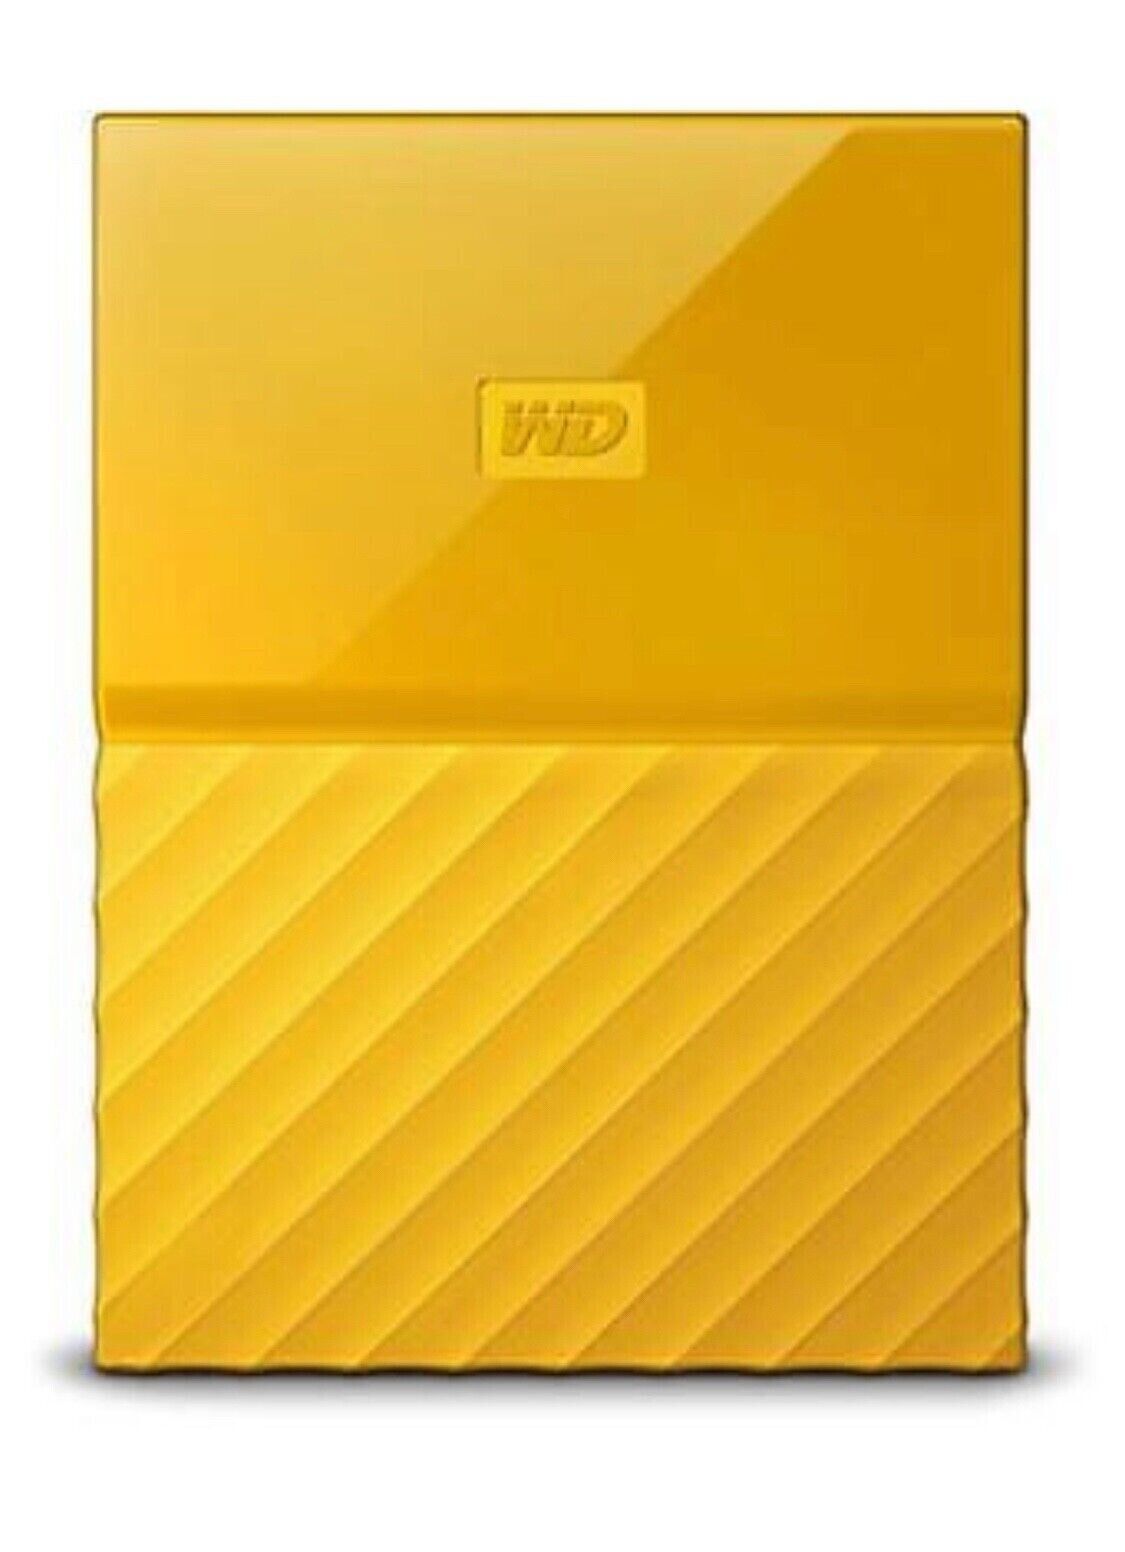 2TB WD Portable Hard Drive with Auto Backup